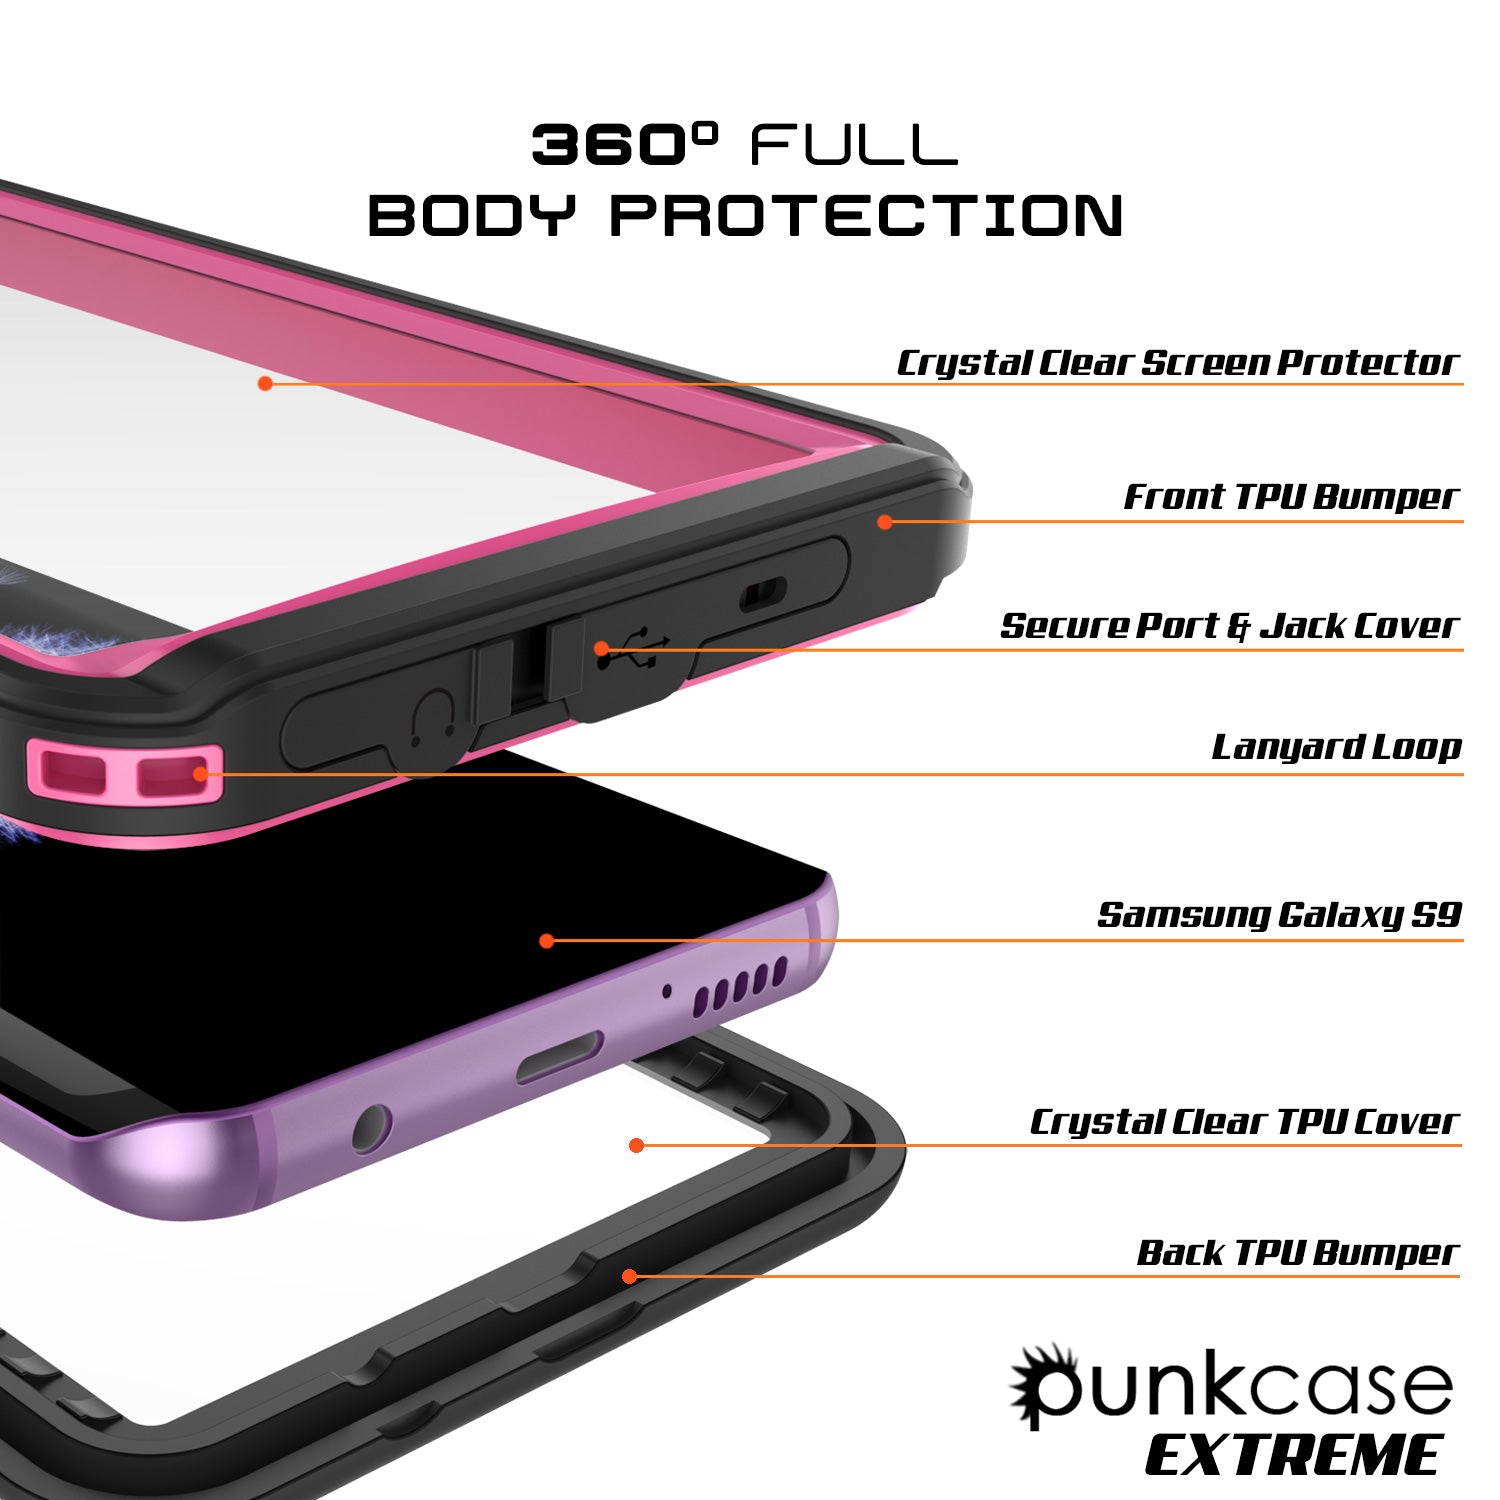 Galaxy S9 Waterproof Case, Punkcase [Extreme Series] [Slim Fit] [IP68 Certified] [Shockproof] [Snowproof] [Dirproof] Armor Cover W/ Built In Screen Protector for Samsung Galaxy S9 [Pink] - PunkCase NZ